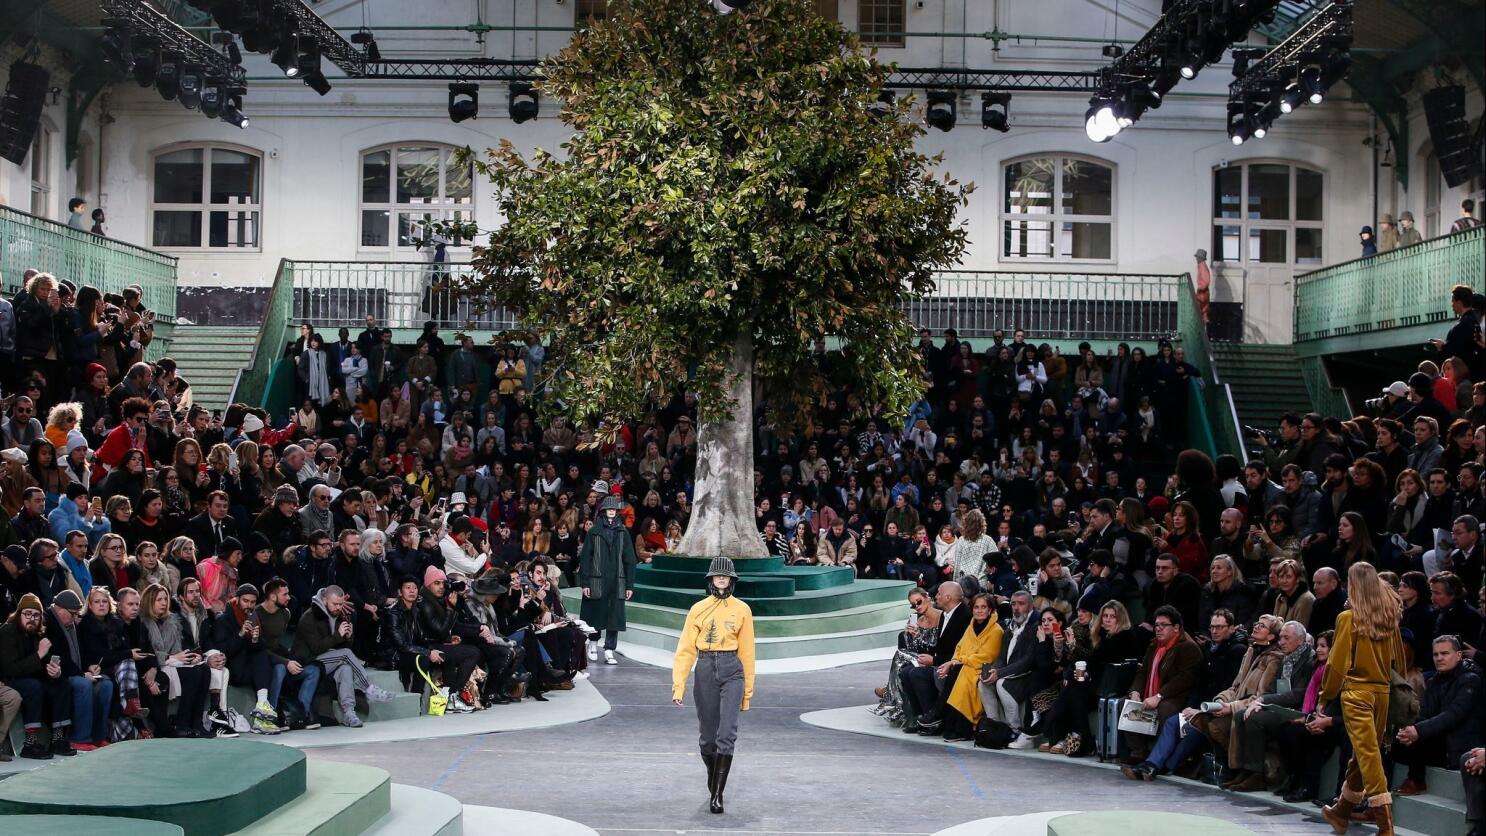 A model walks the runway during the Lacoste Womenswear Fall-Winter 2018/19  show held at Lycee Carnot as part of Paris Fashion Week on February 28,  2018 in Paris, France. Photo by Raul